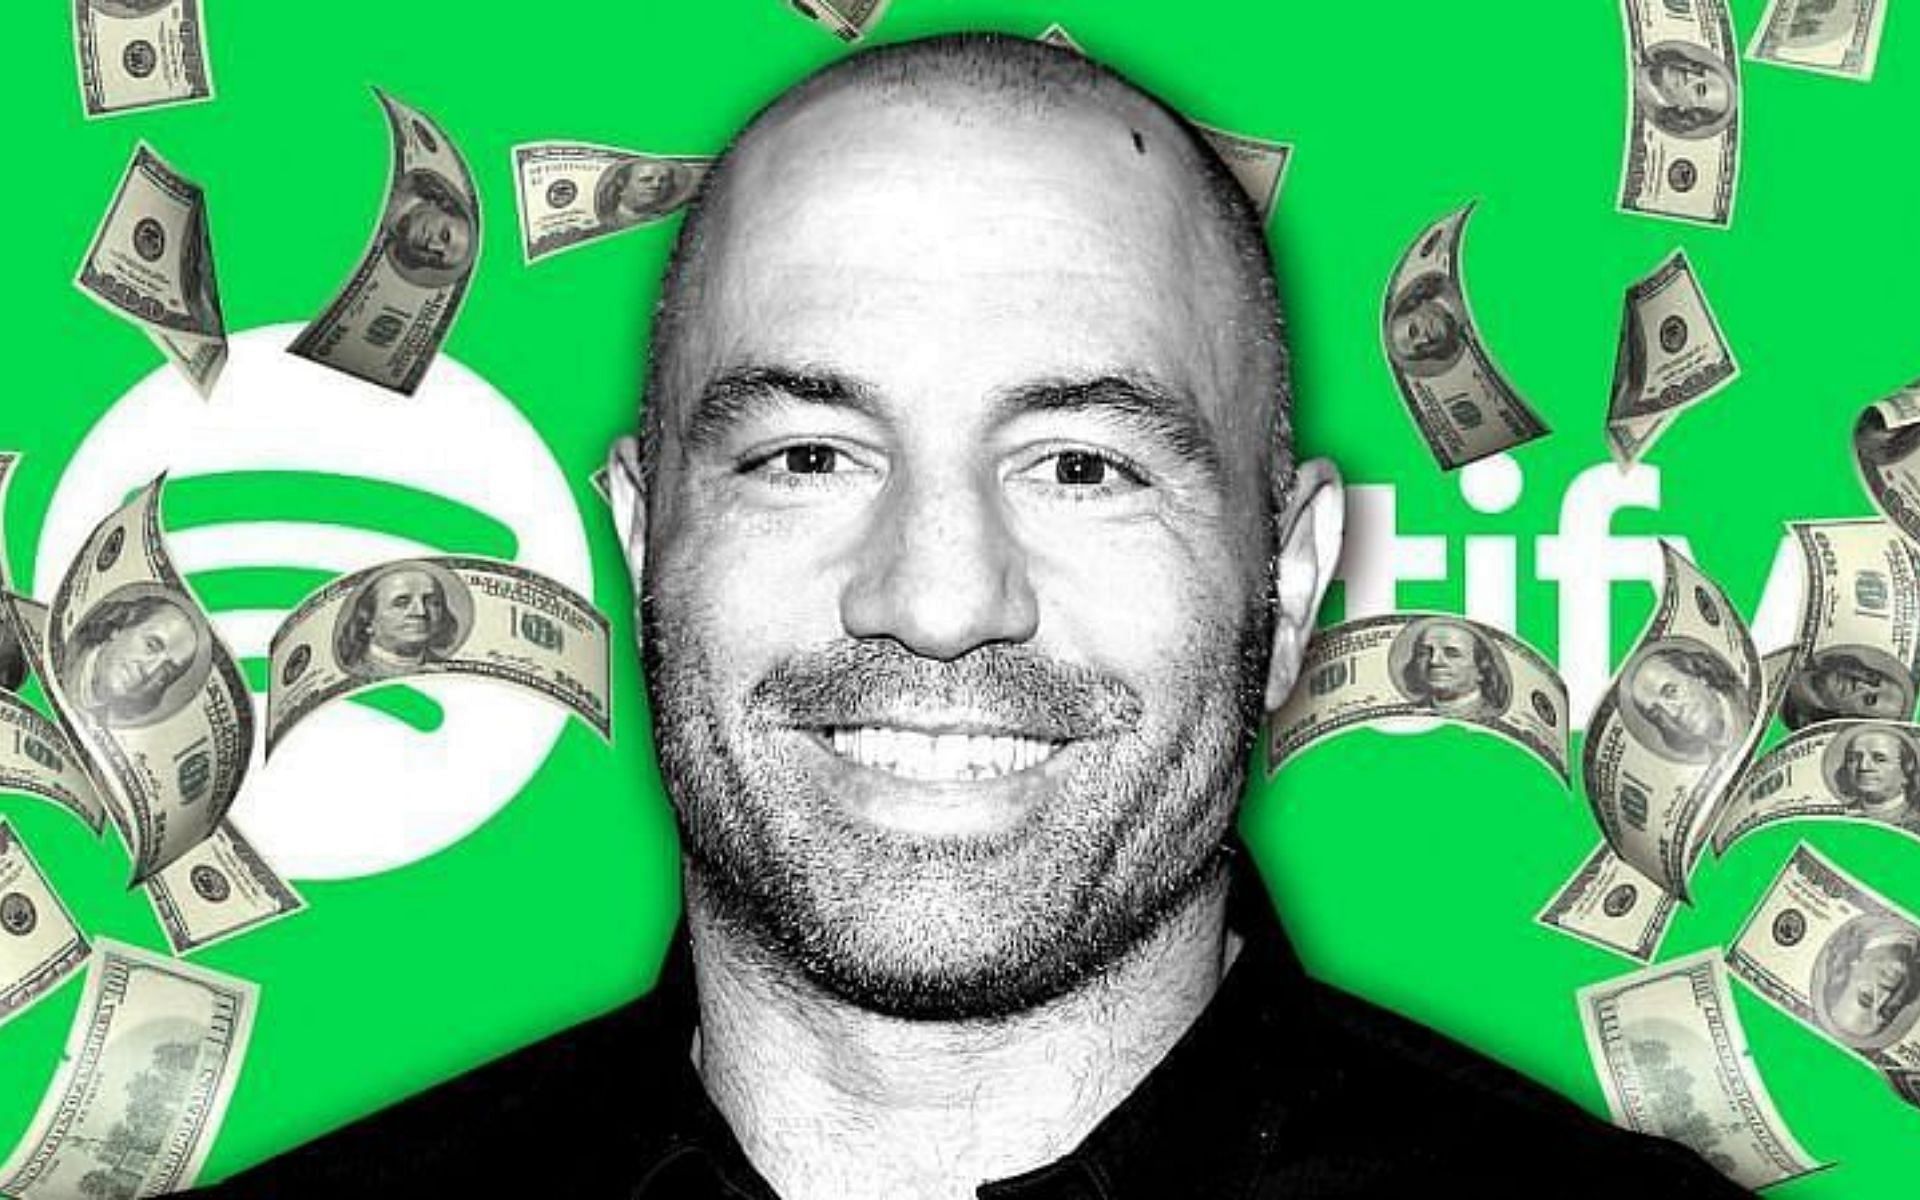 Who owns Rumble, the video platform that offered Joe Rogan $100 million to switch from Spotify?